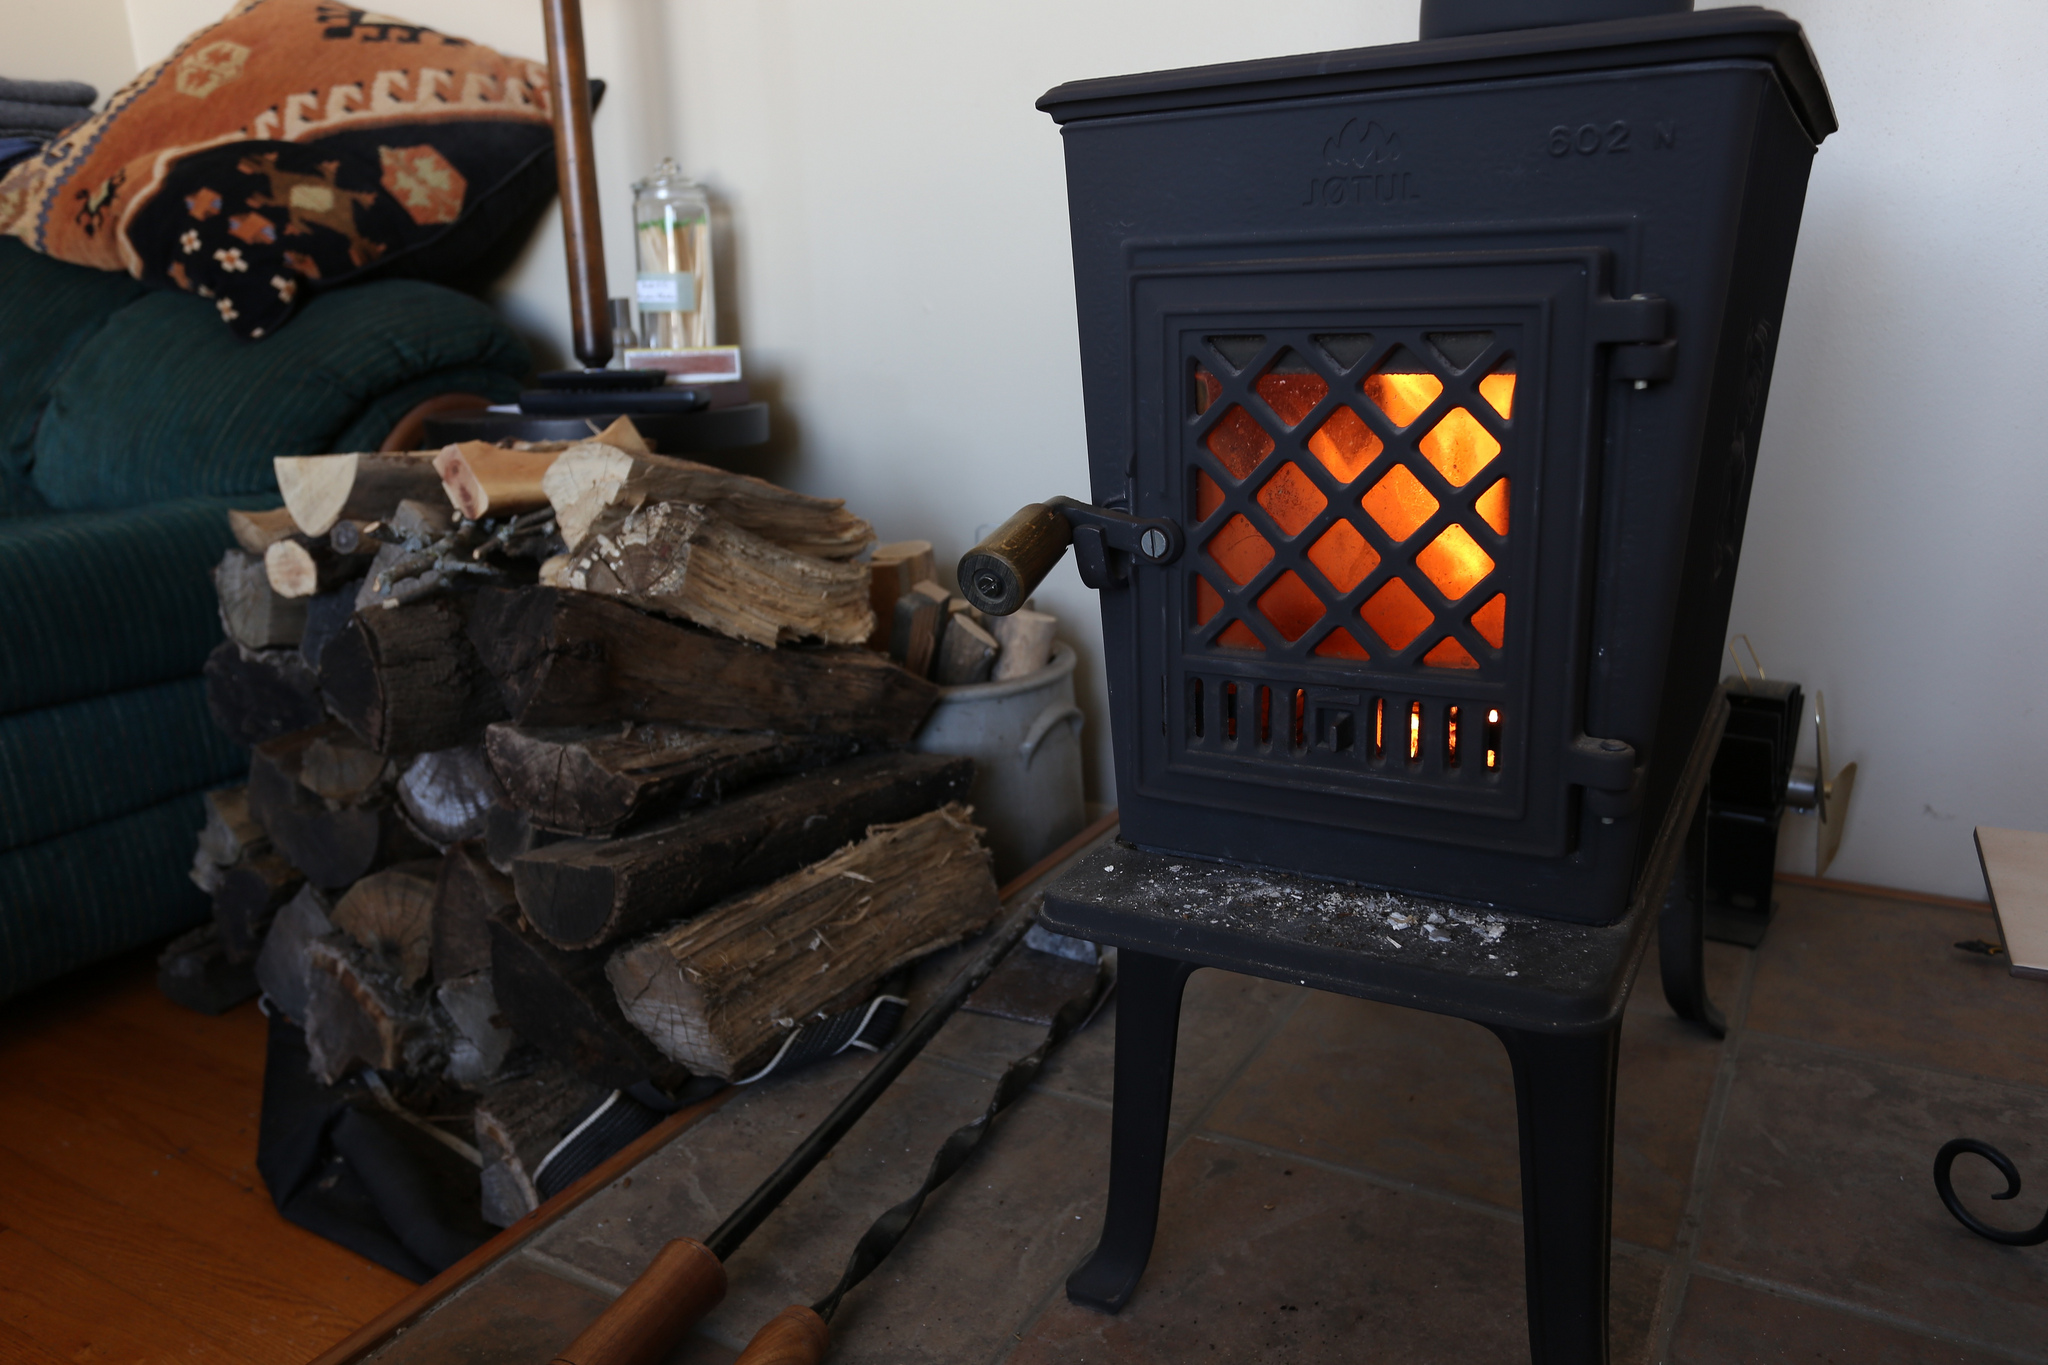 The federal EPA is giving wood stove manufacturers more time to comply with air quality standards. CREDIT: ANDY ZIEGLER/FLICKR/CREATIVE COMMONS